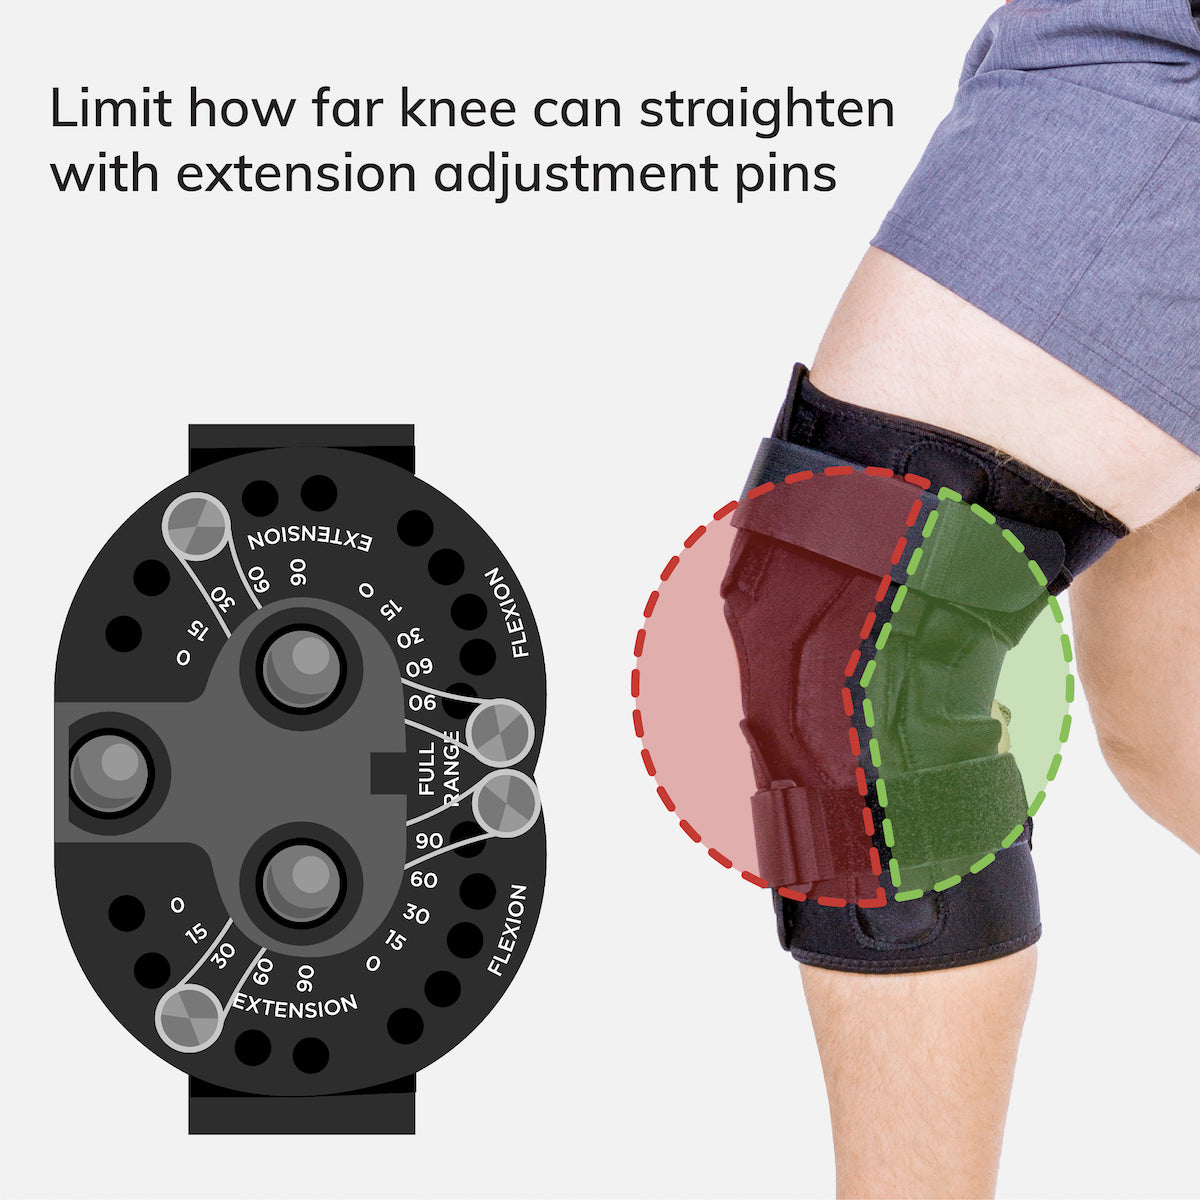 Adjusting the extension pins prevent how far you can bend your knee, generally used post op for hyperextension or a pcl tear